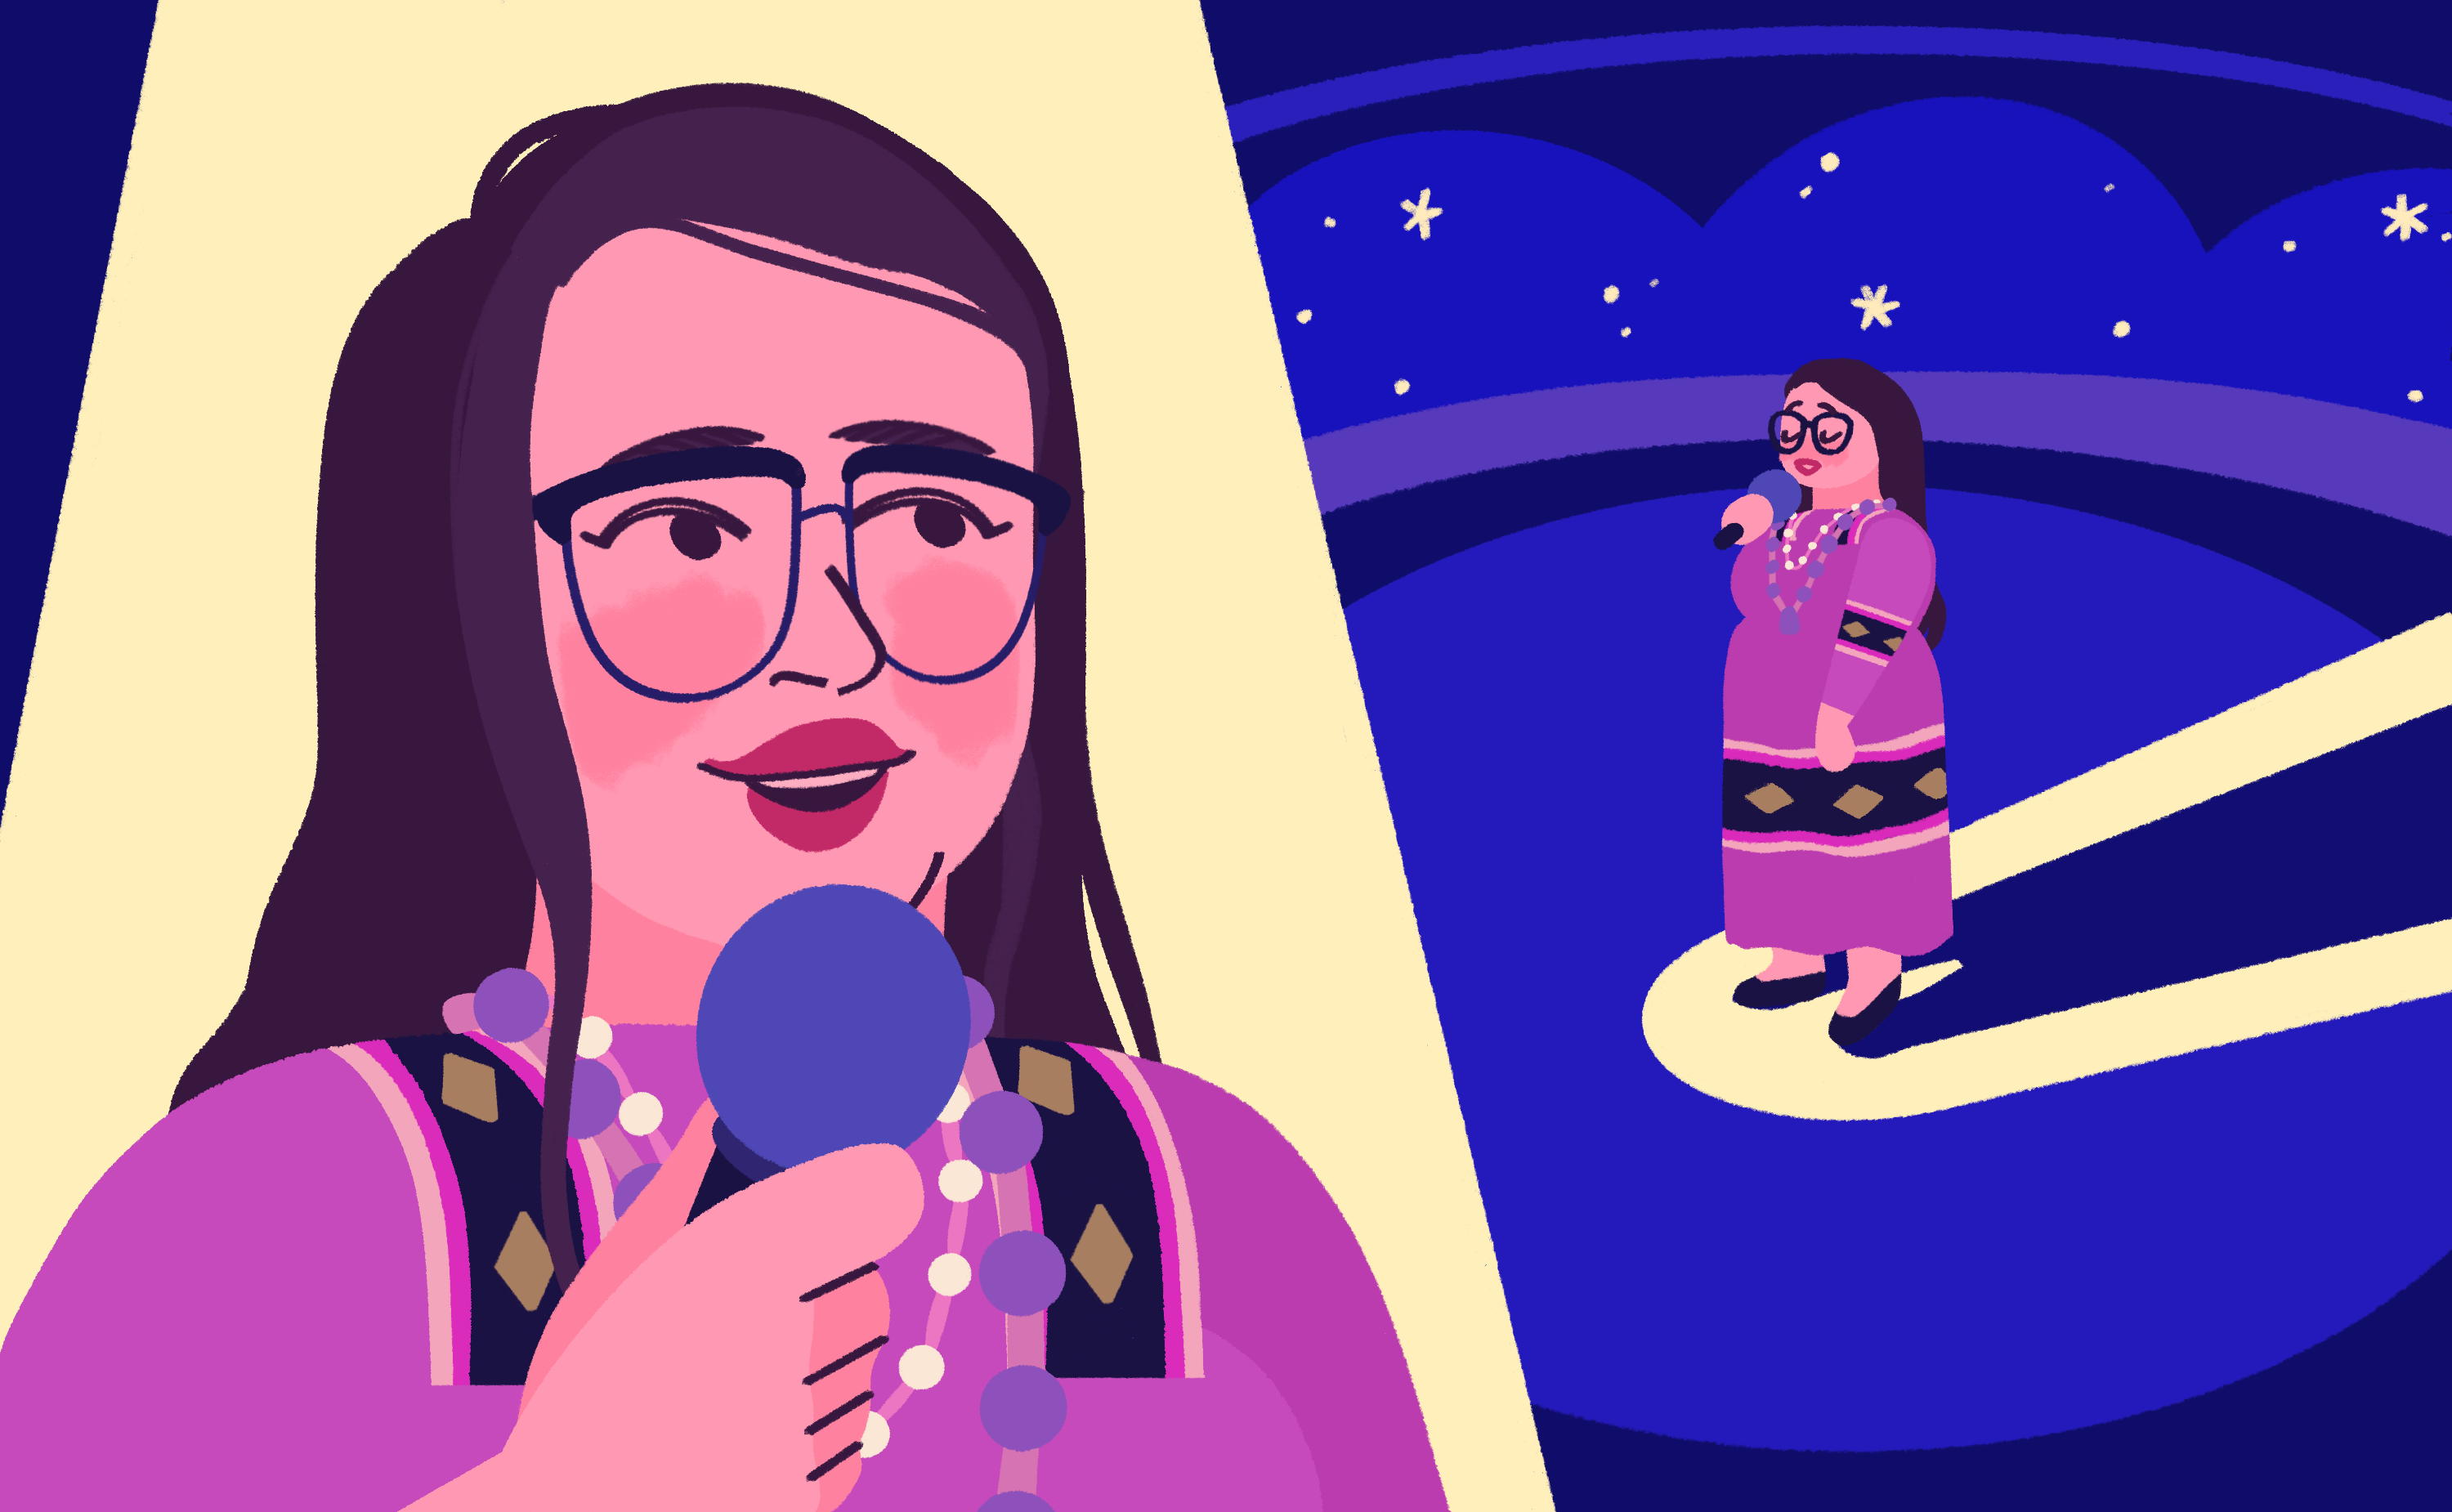 Illustration of an indigenous singer in a blue stage with star, the singer is wearing a purple dress and glasses